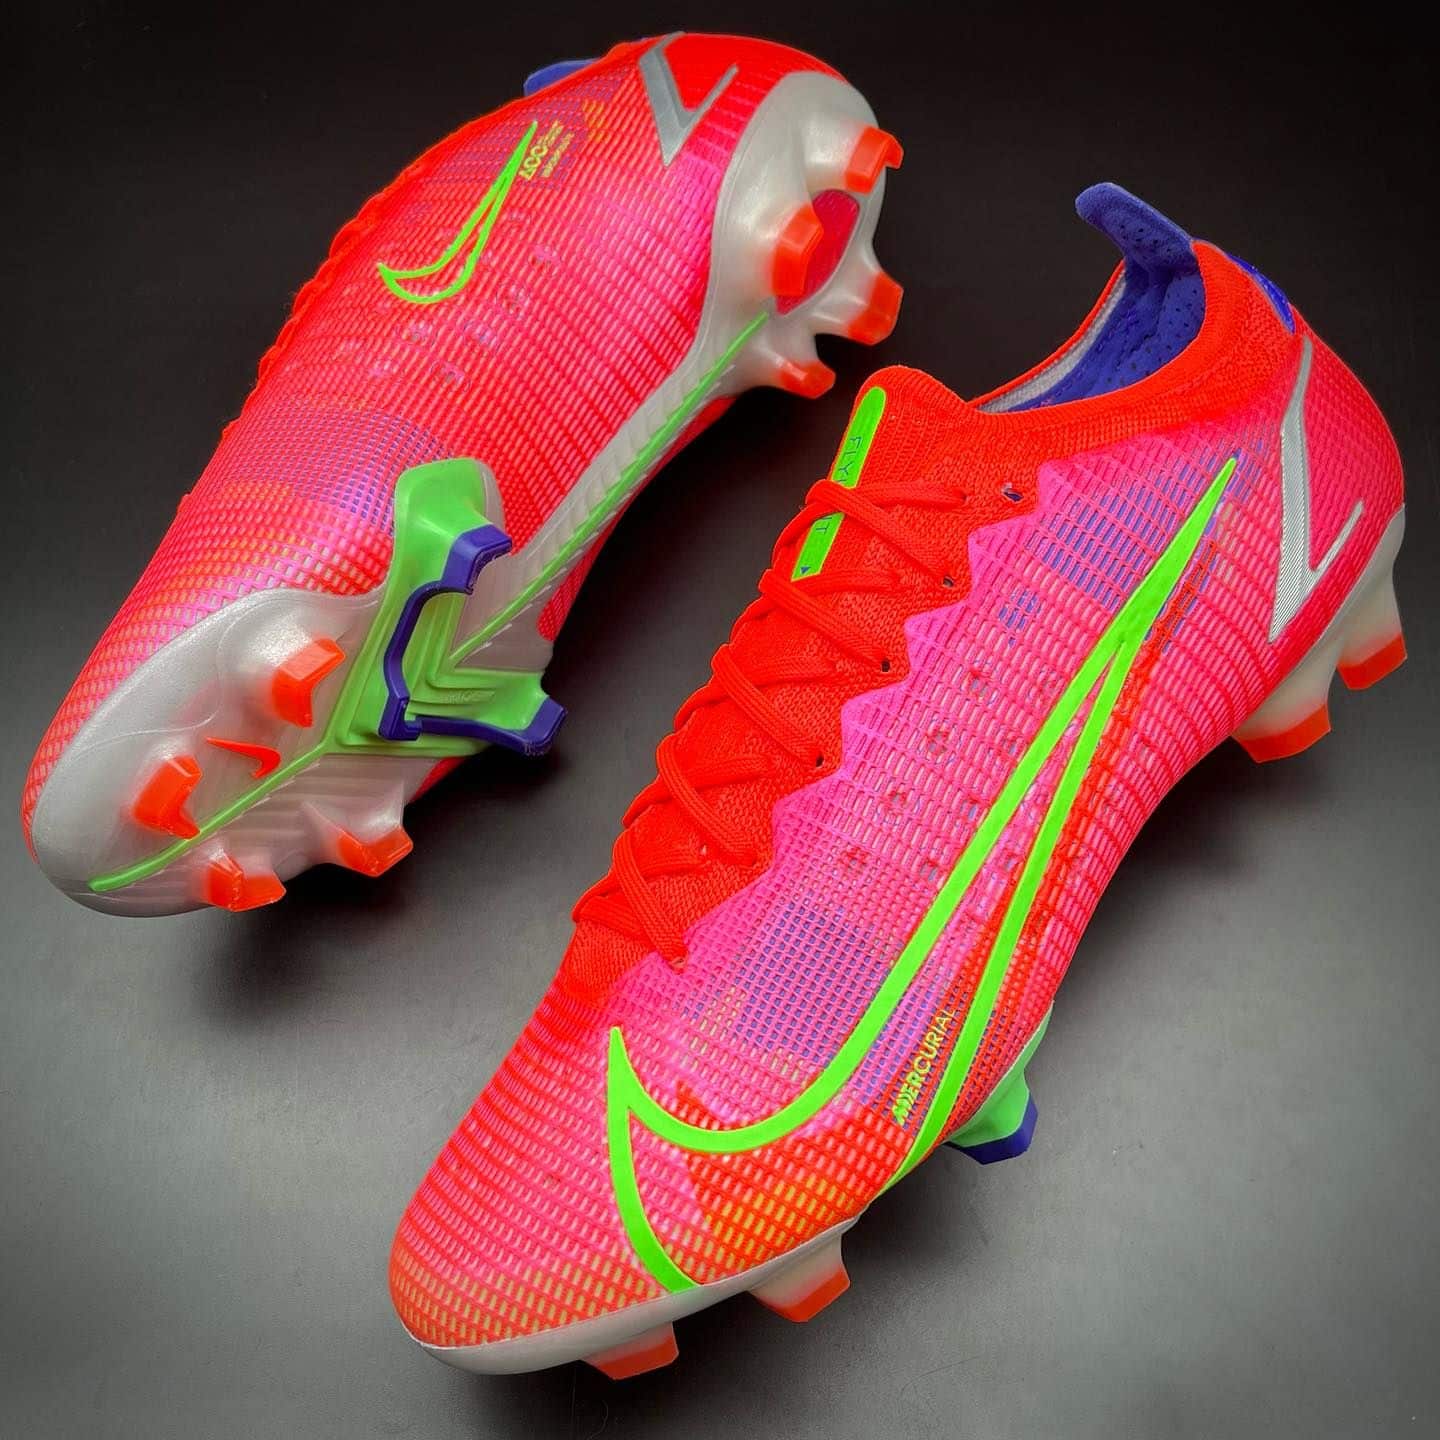 , Soccer Click To Buy Top Quality Nike Vapor Soccer Cleats,Nike Tiempo Superfly Soccer Shoes|Pinterest